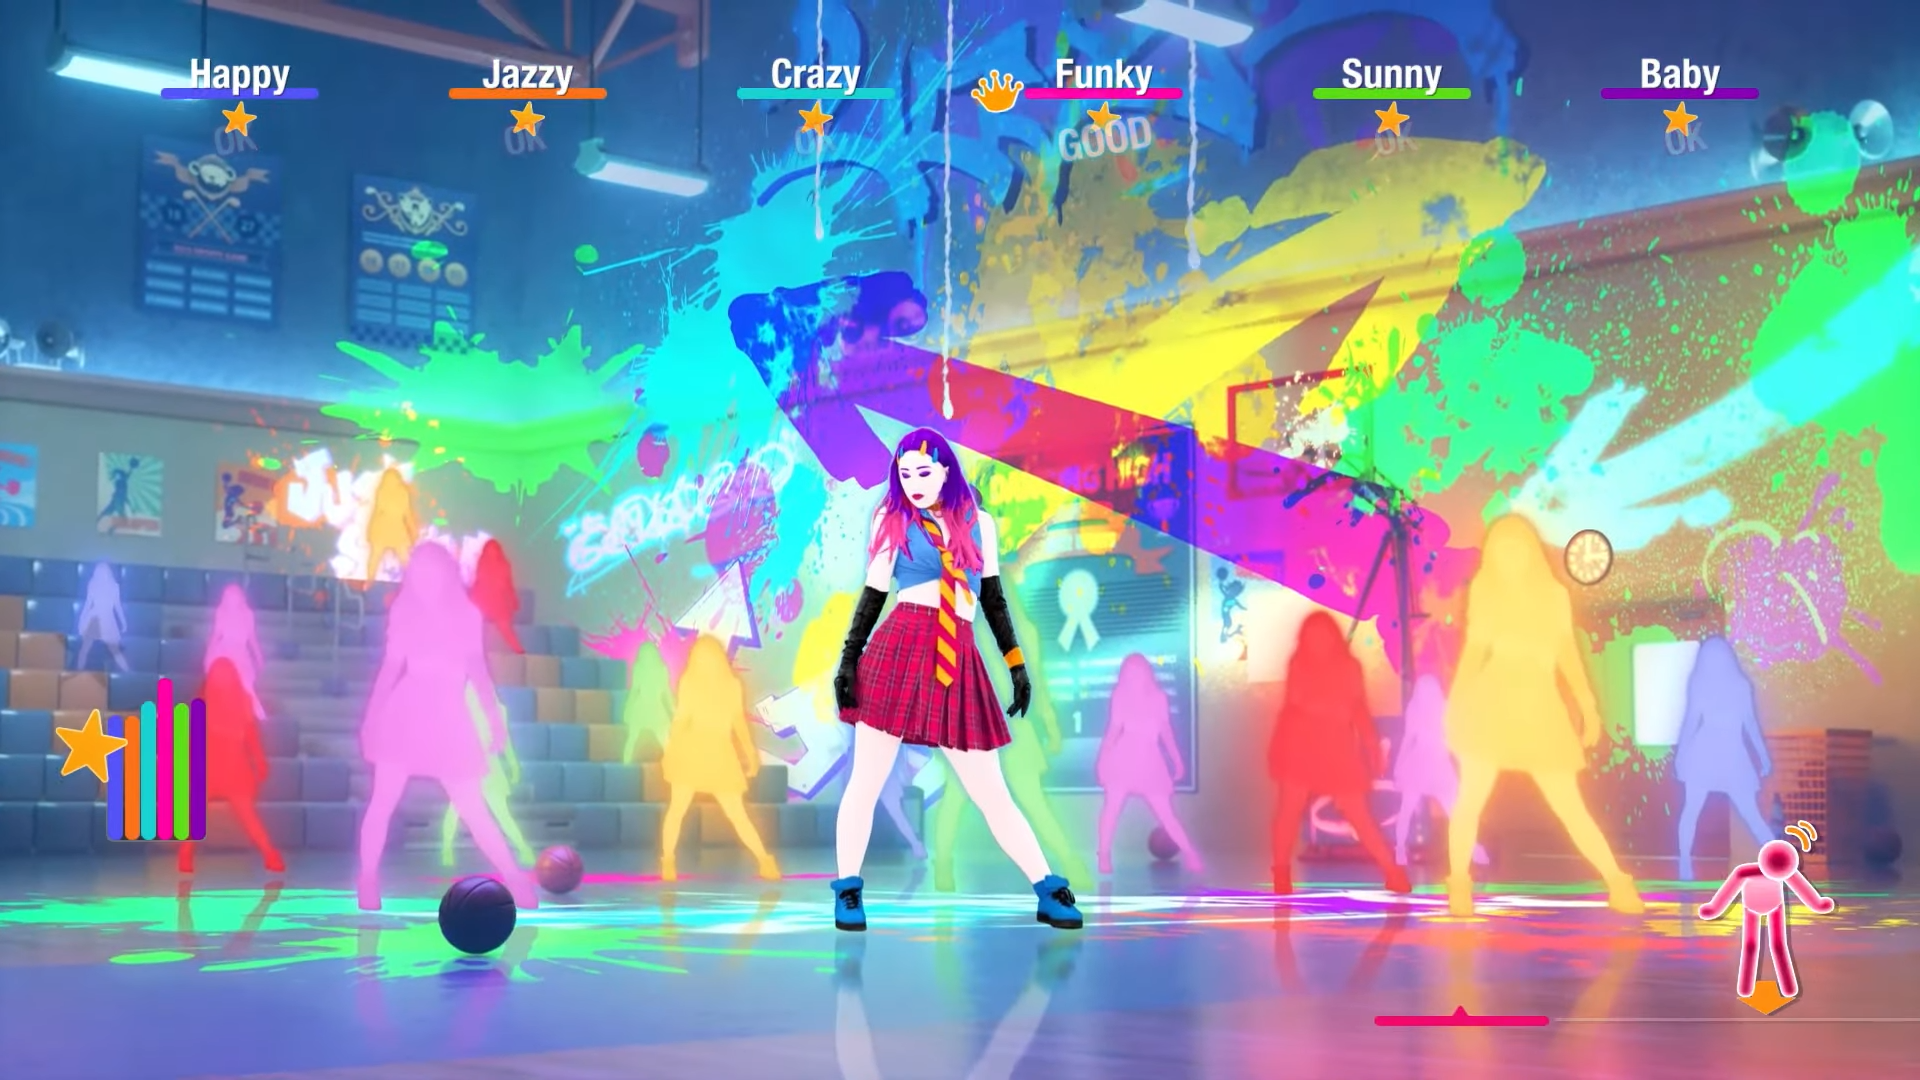 https://static.wikia.nocookie.net/justdance/images/c/c1/Good4u_jd2022_gameplay.png/revision/latest?cb=20211021160532